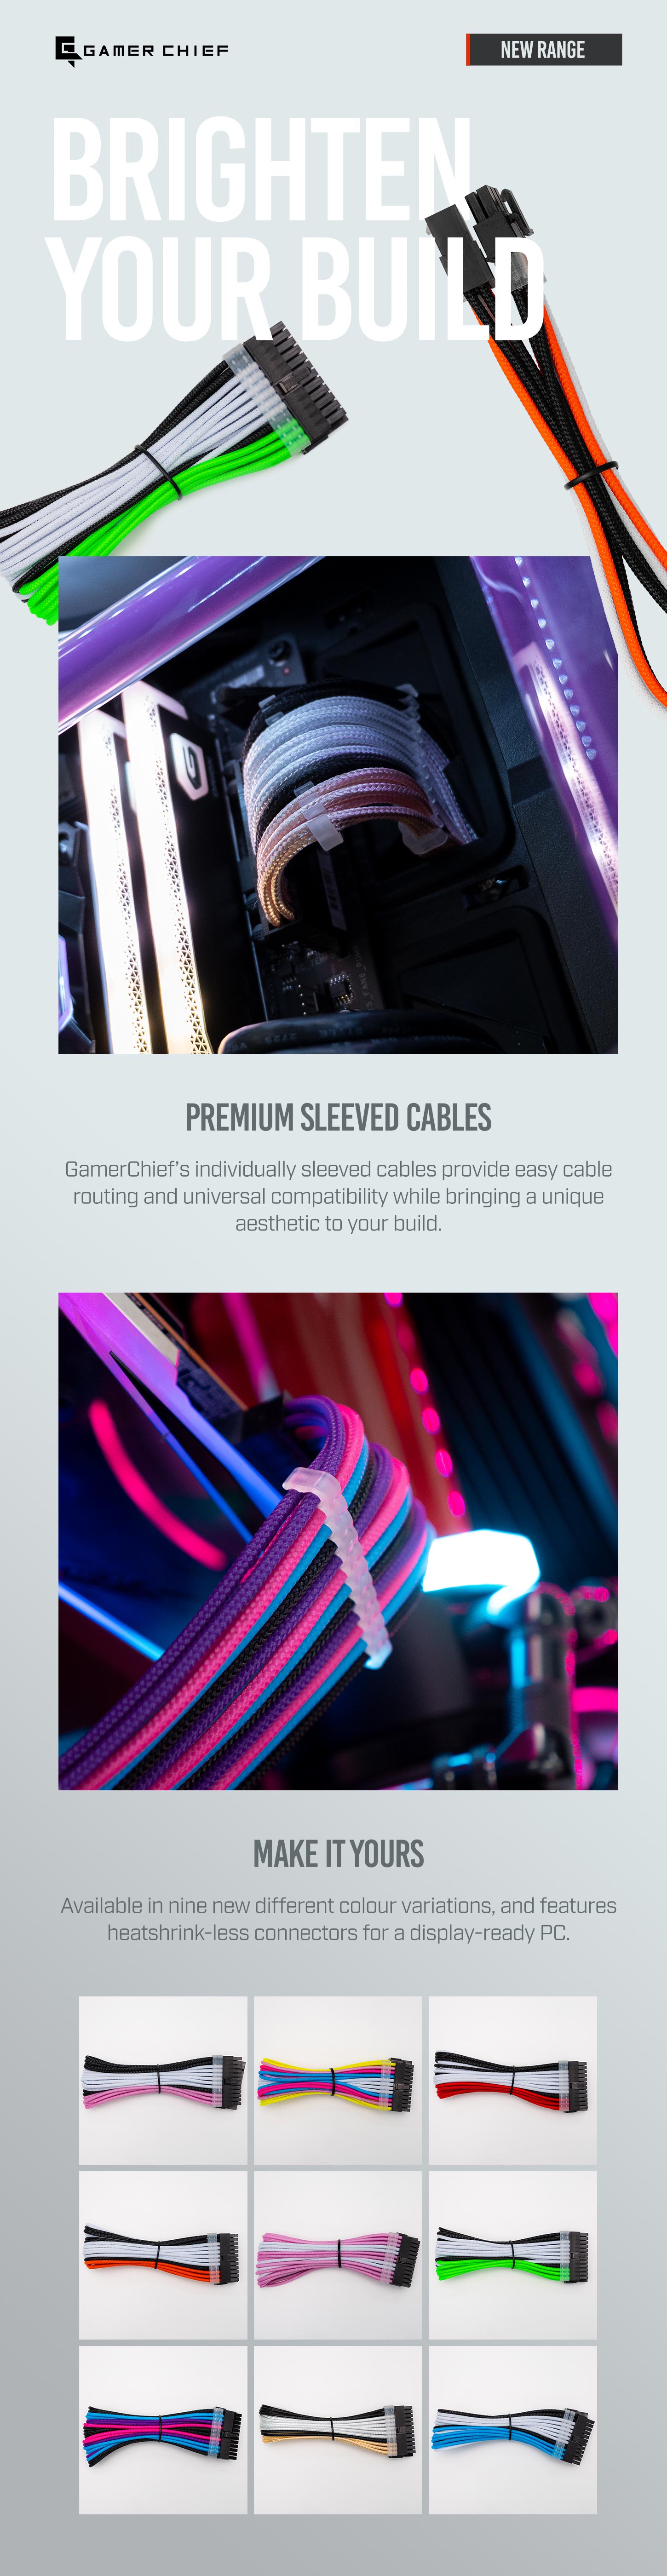 A large marketing image providing additional information about the product GamerChief Elite Series 24-Pin ATX 30cm Sleeved Extension Cable (Red/White/Black) - Additional alt info not provided